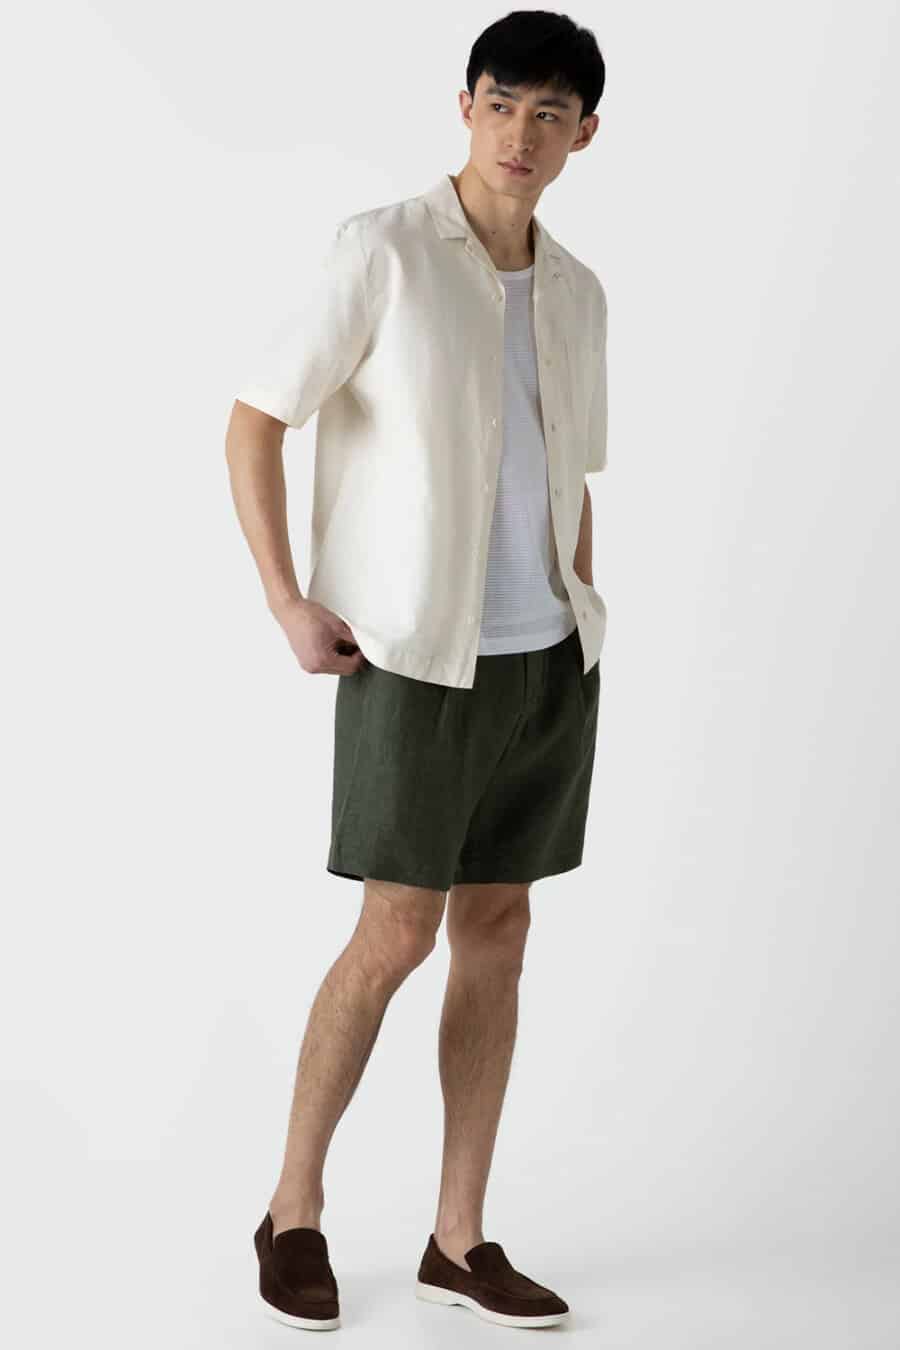 Men's dark green shorts, white vest, beige short sleeve shirt and brown suede loafers outfit